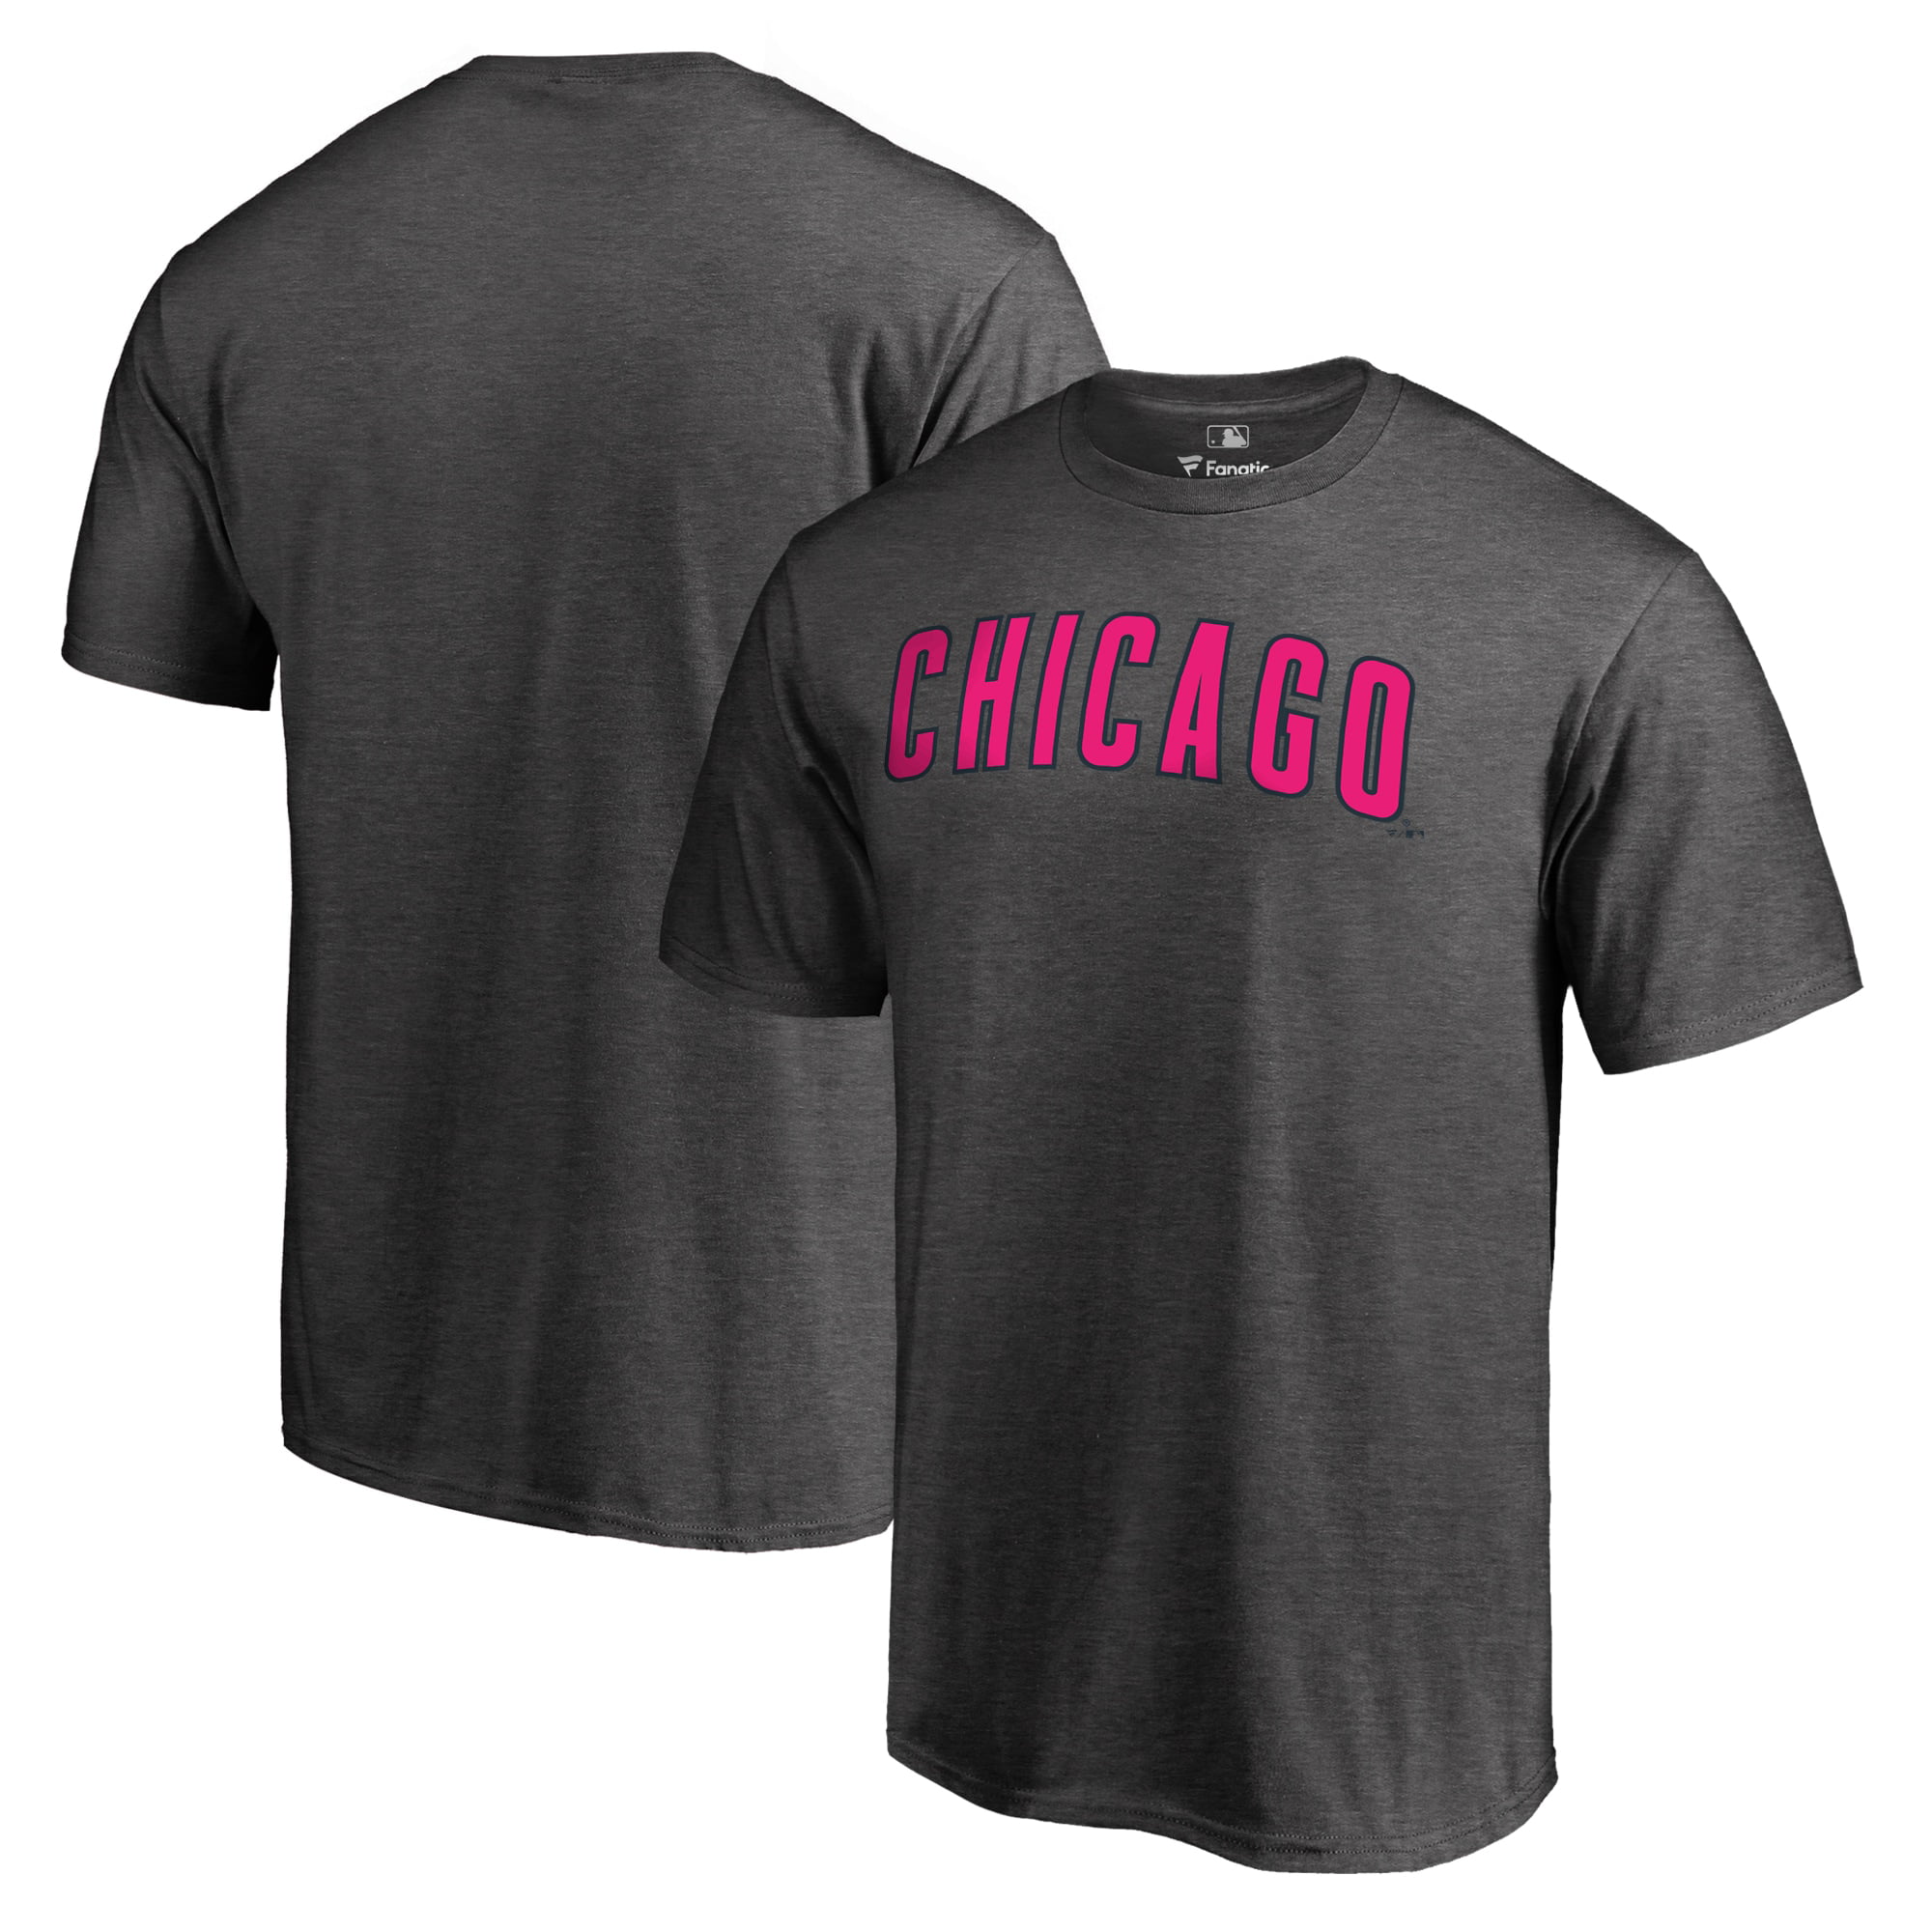 Mens Fanatics Branded Heathered Gray Chicago Cubs Pink Wordmark T-Shirt